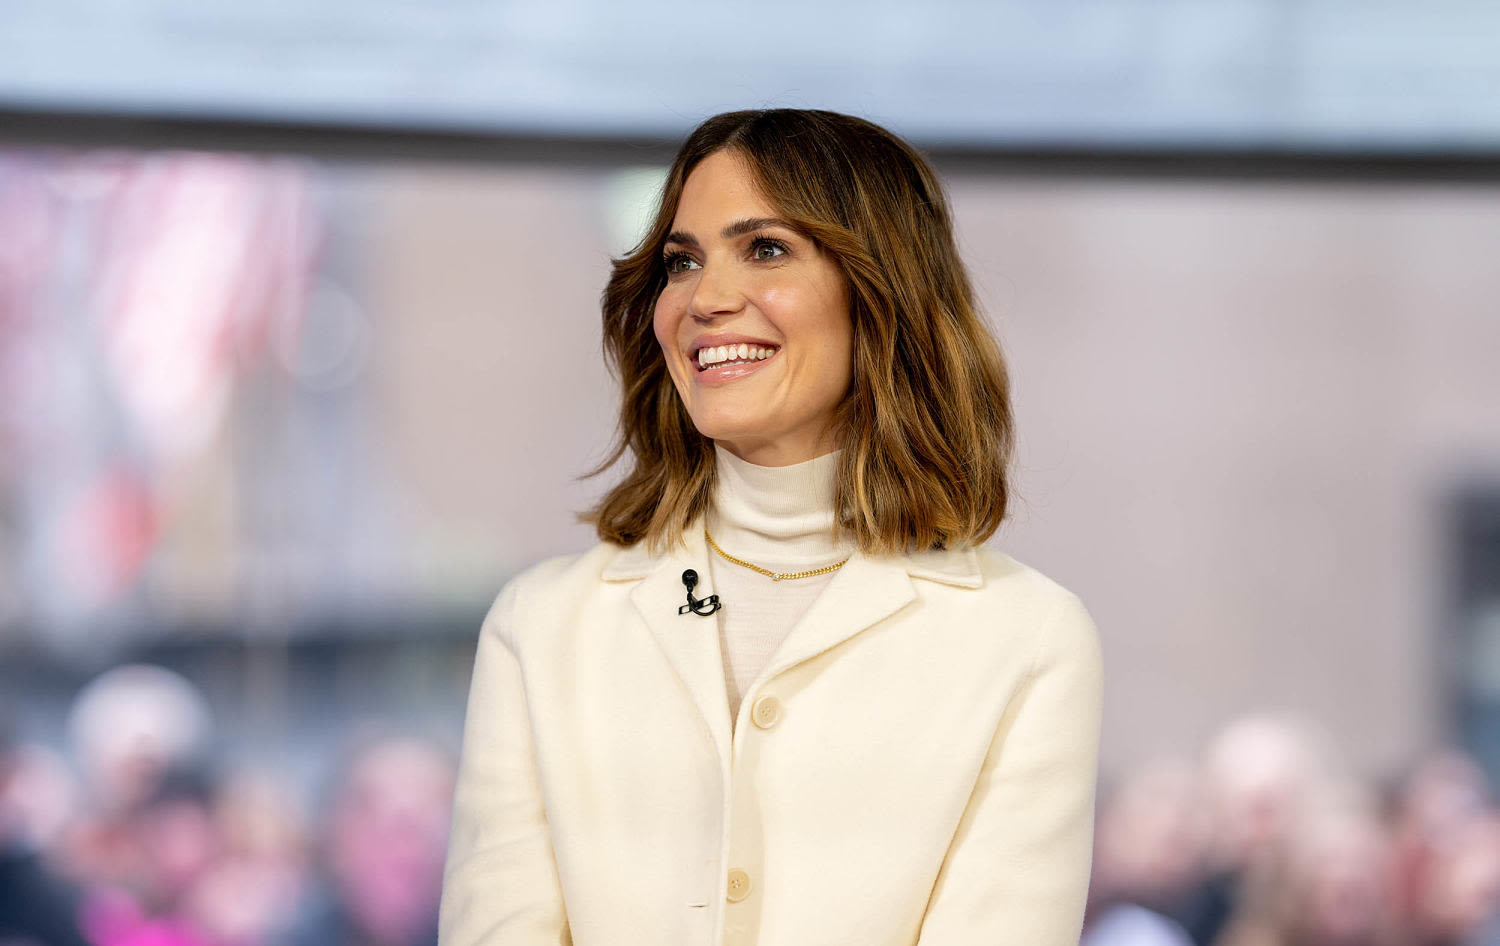 Mandy Moore reveals her ‘This Is Us’ co-stars’ reaction to her pregnancy announcement